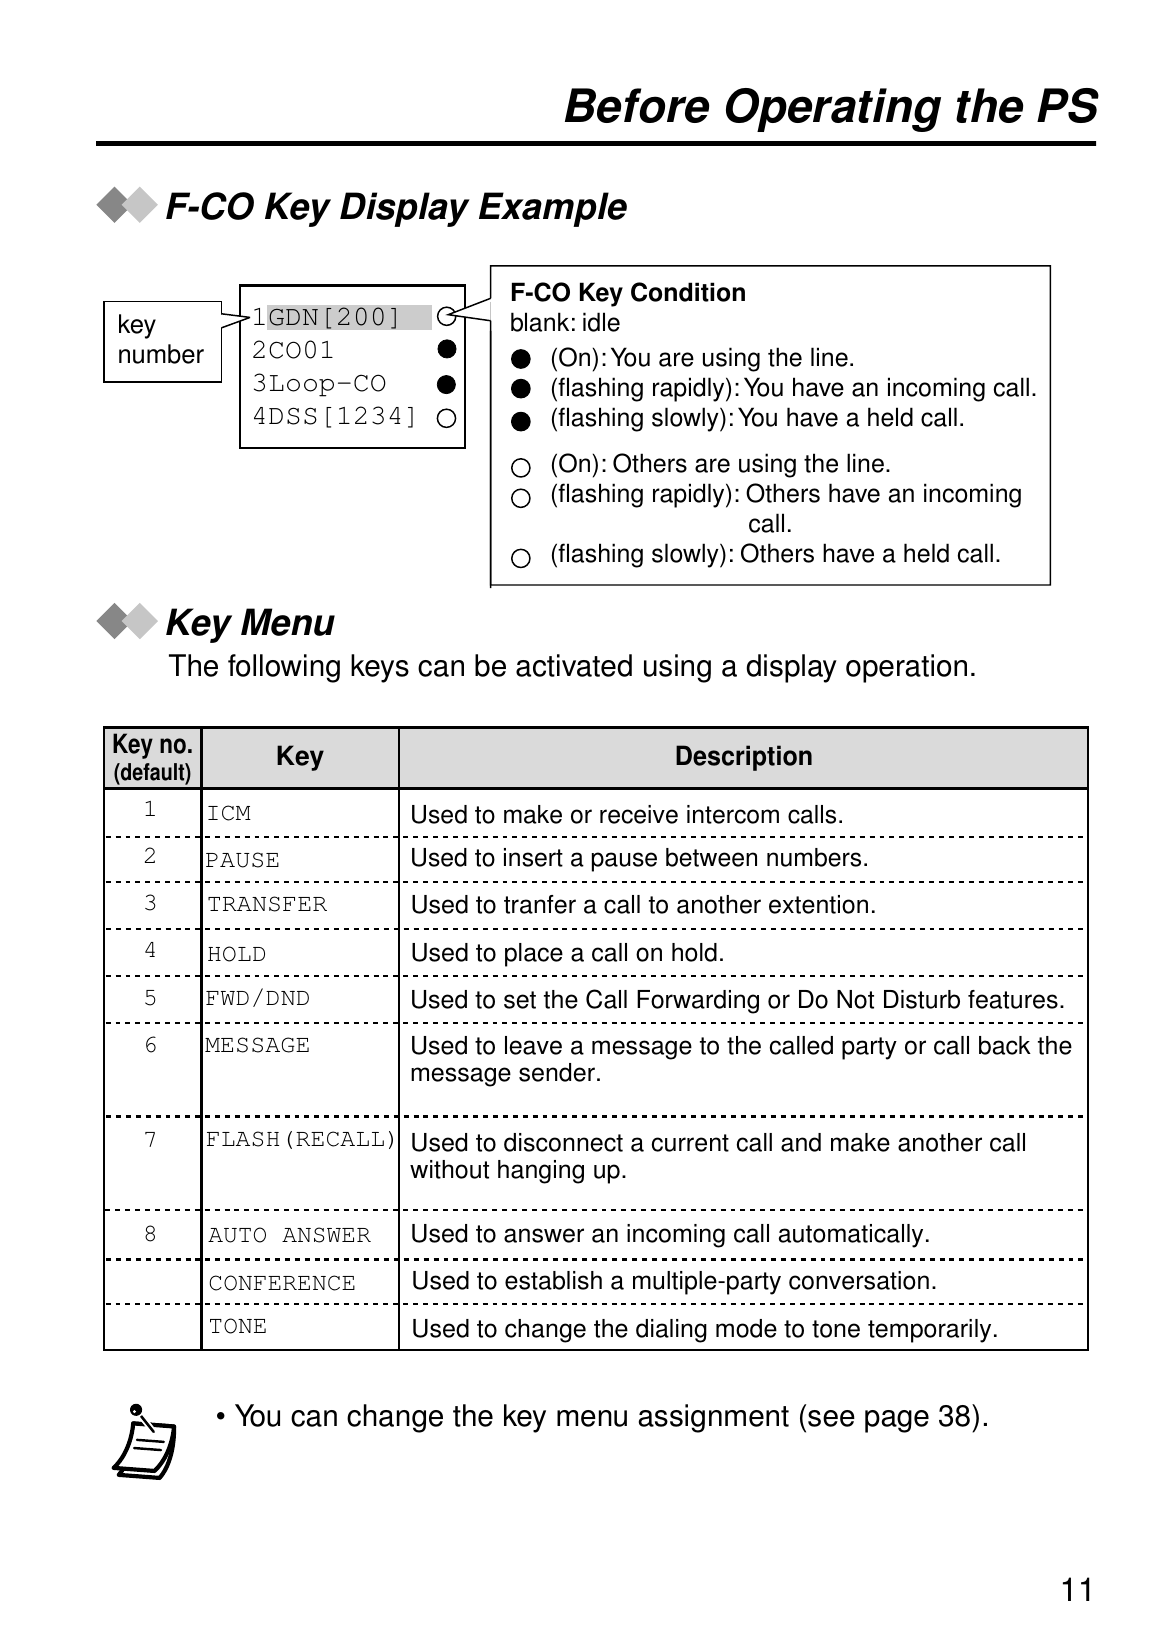 11Before Operating the PSF-CO Key Display ExampleKey MenuThe following keys can be activated using a display operation.• You can change the key menu assignment (see page 38).1GDN[200]2CO013Loop-CO4DSS[1234]key numberF-CO Key Conditionblank: idle(On): You are using the line.(flashing rapidly): You have an incoming call.(flashing slowly): You have a held call.(On): Others are using the line.(flashing rapidly): Others have an incoming call.(flashing slowly): Others have a held call.ICMUsed to make or receive intercom calls.PAUSEUsed to insert a pause between numbers.TRANSFERHOLDUsed to tranfer a call to another extention.Used to place a call on hold.FWD/DNDUsed to set the Call Forwarding or Do Not Disturb features. MESSAGEUsed to leave a message to the called party or call back the message sender.FLASH(RECALL)AUTO ANSWERUsed to disconnect a current call and make another call without hanging up.Used to answer an incoming call automatically.CONFERENCETONE21345678Used to establish a multiple-party conversation.Used to change the dialing mode to tone temporarily. Key no.(default)KeyDescription